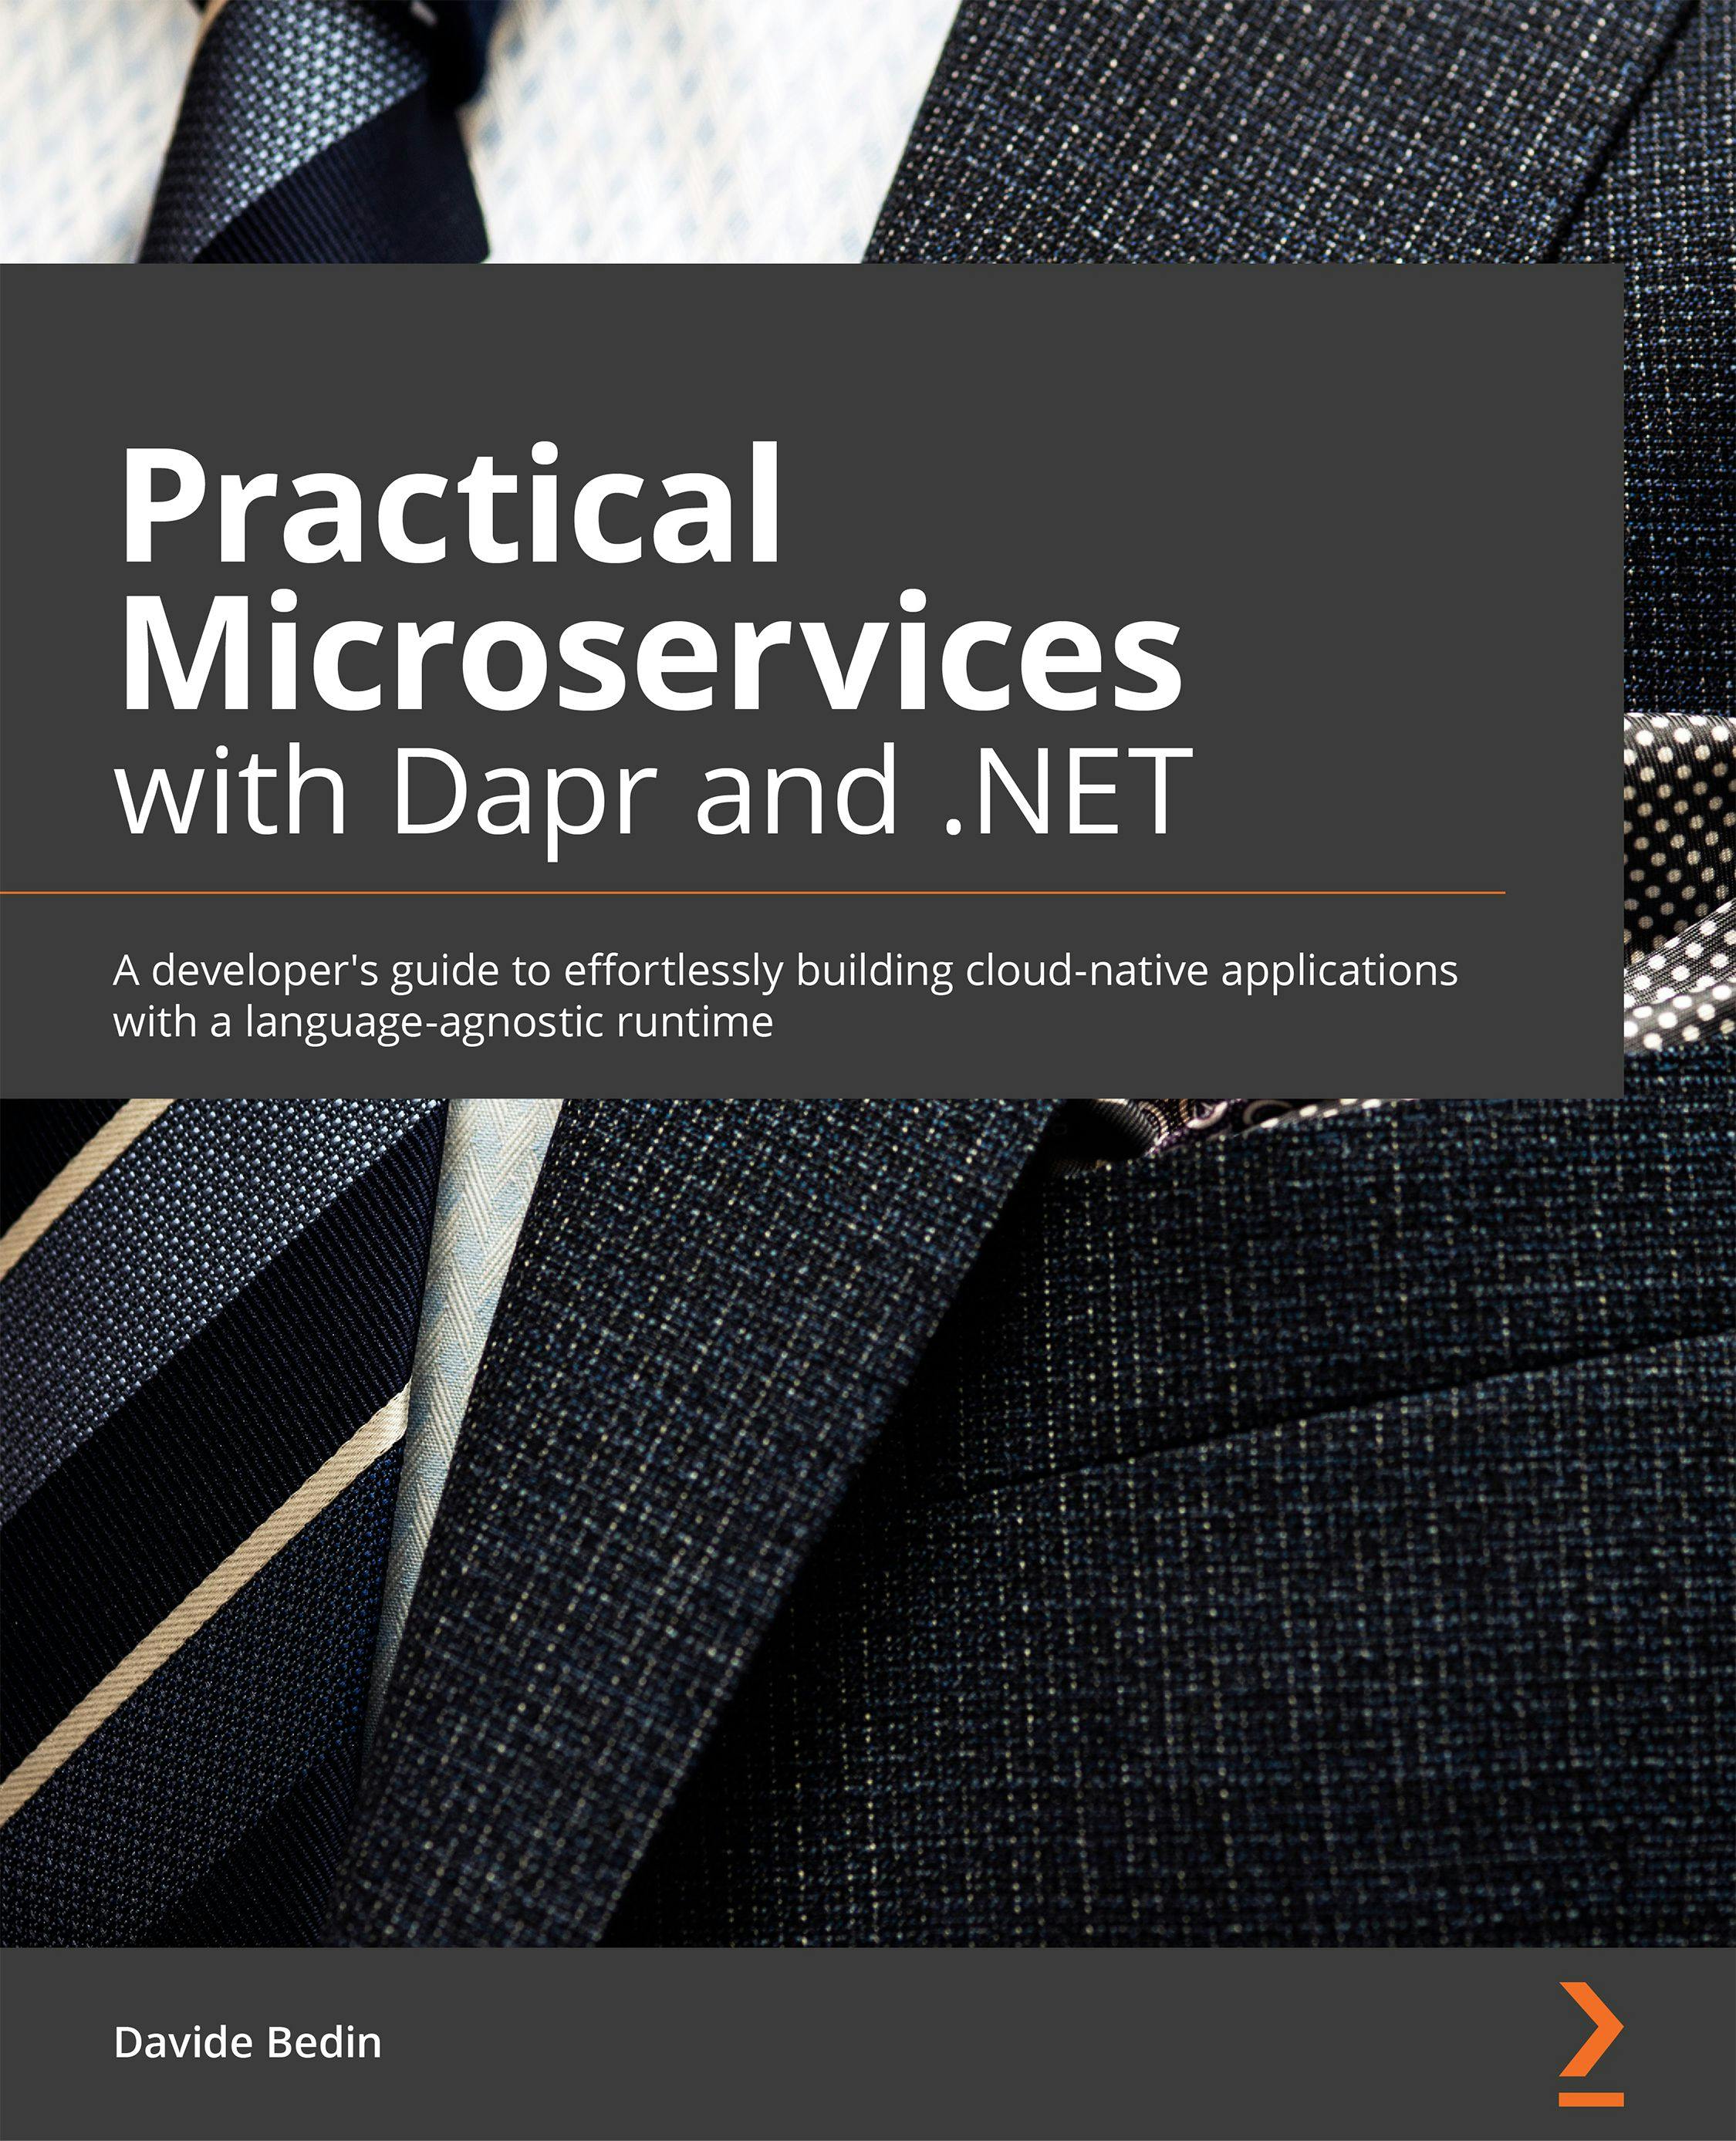 featured image - Microsoft's DAPR (Distributed Application Runtime): An Overview